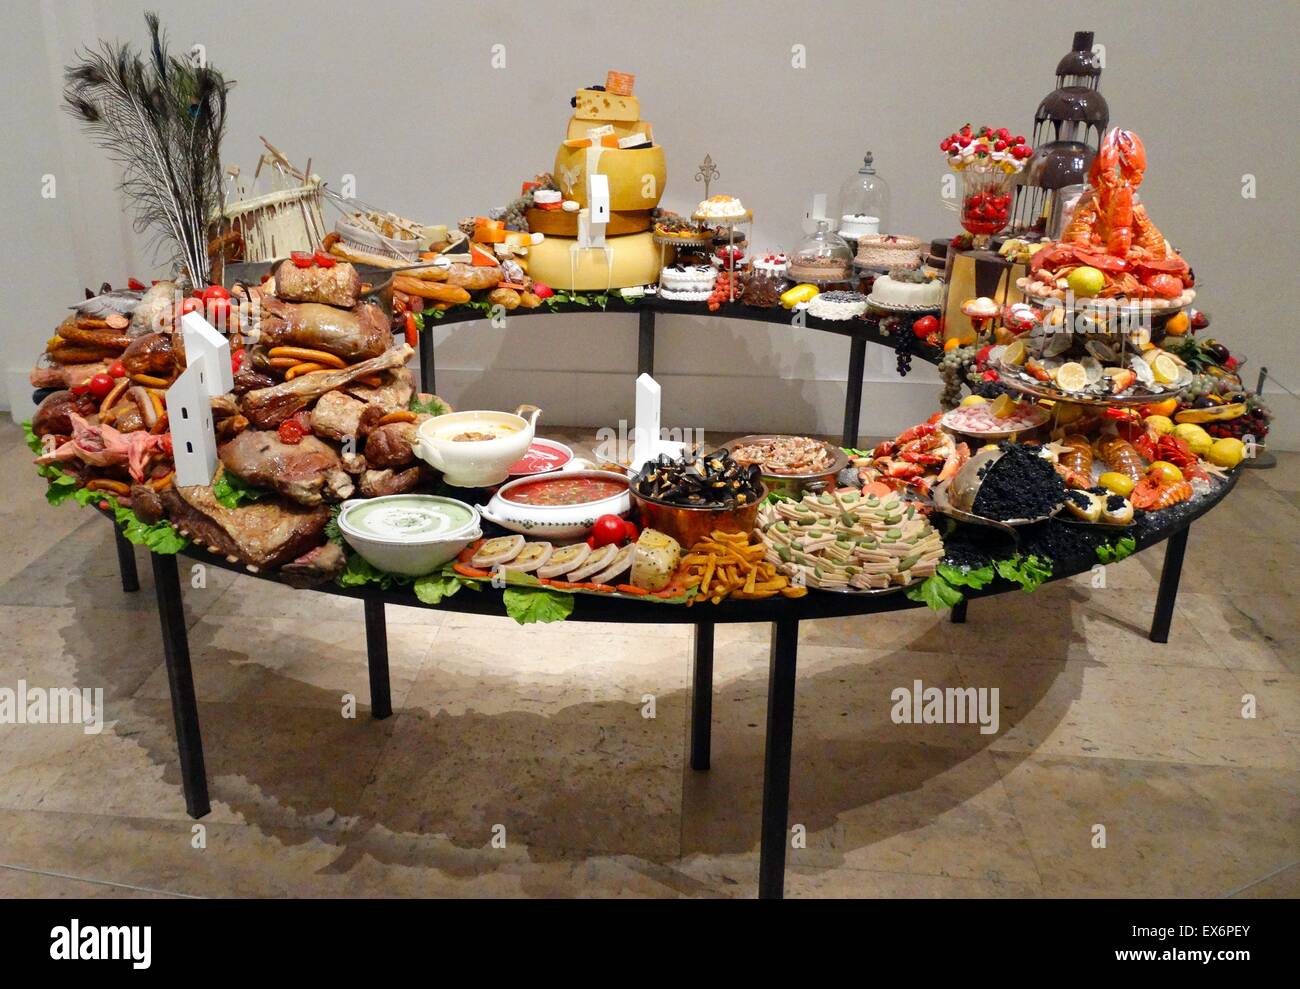 Sculpture titled 'Le Festin III' by Gilles Barbier (1965-) Ni-Vanuatu Contemporary artist. Oil painting on synthetic resin, cookware and table. Dated 2014 Stock Photo